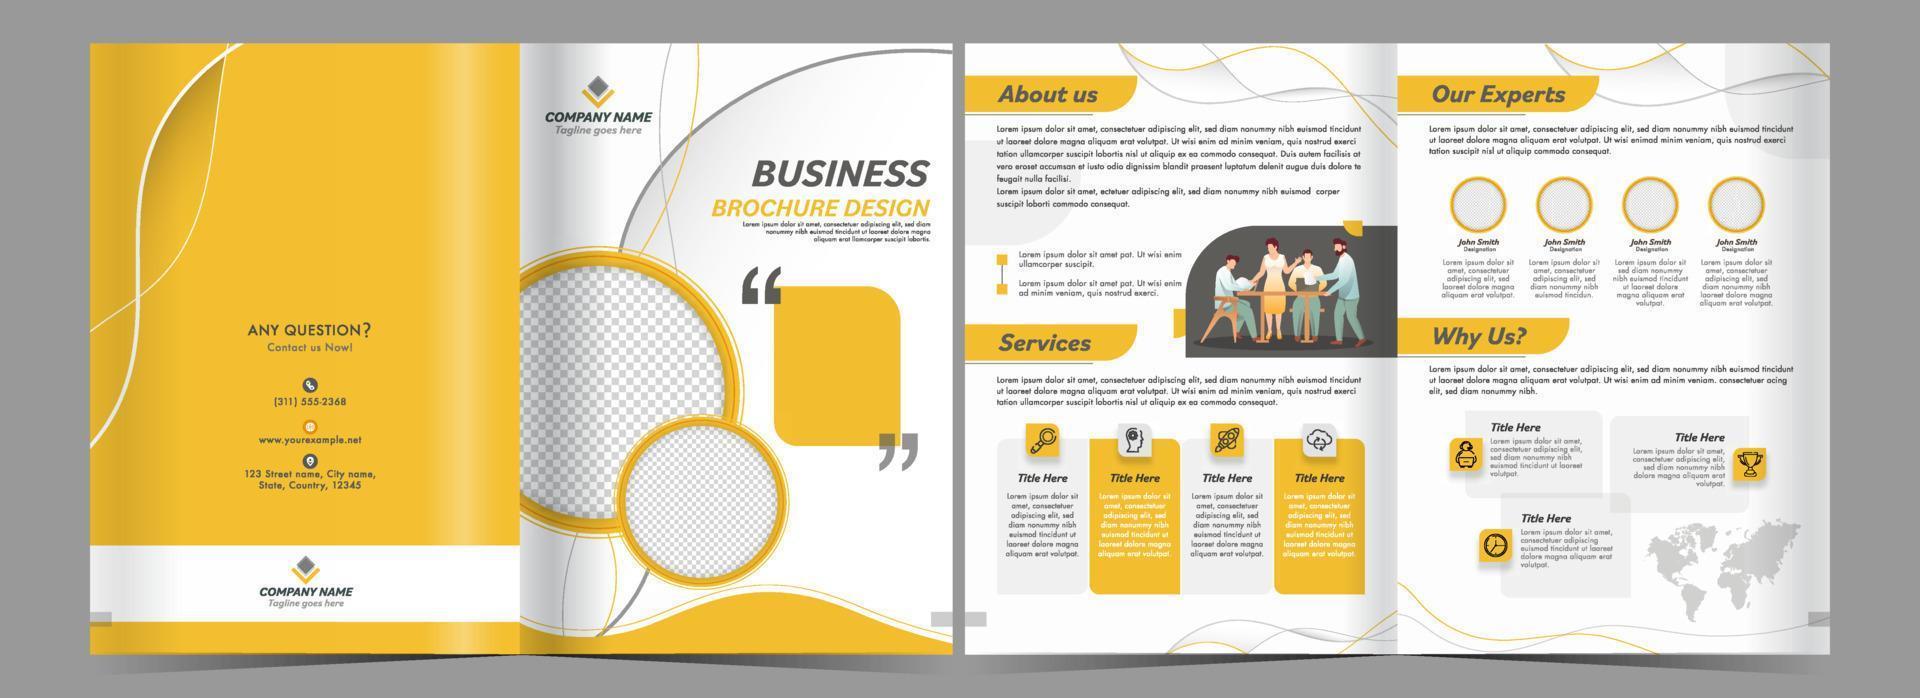 Double-Sides Of Business Bi-Fold Brochure Design In Yellow And White Color. vector